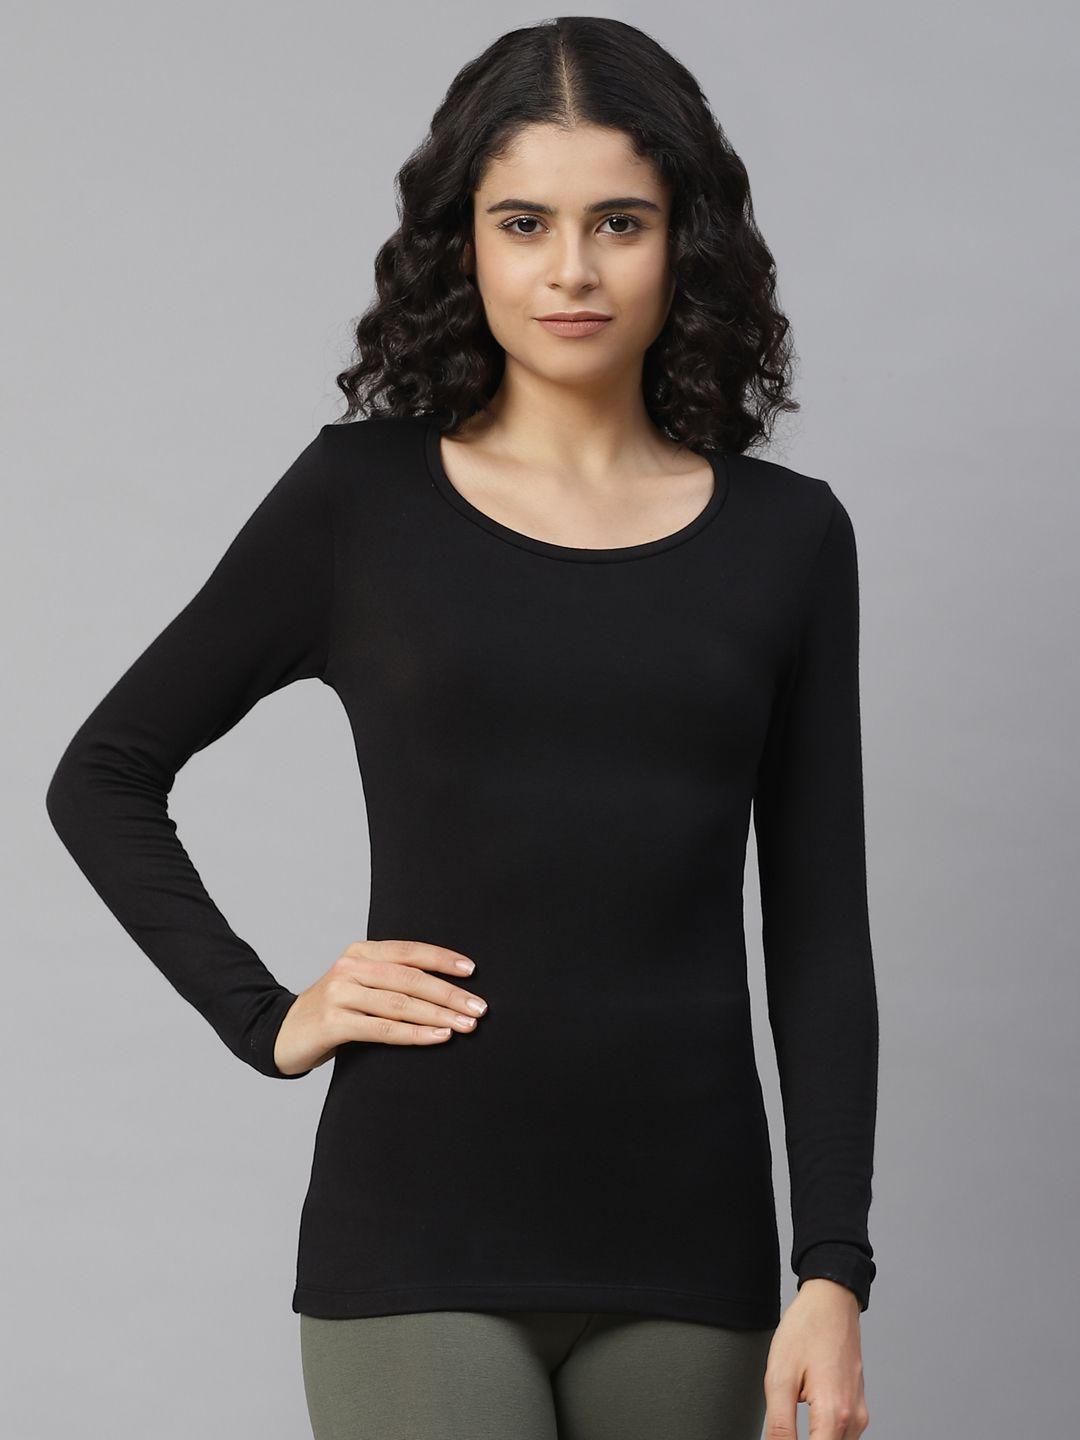 marks-&-spencer-women-black-solid-thermal-top